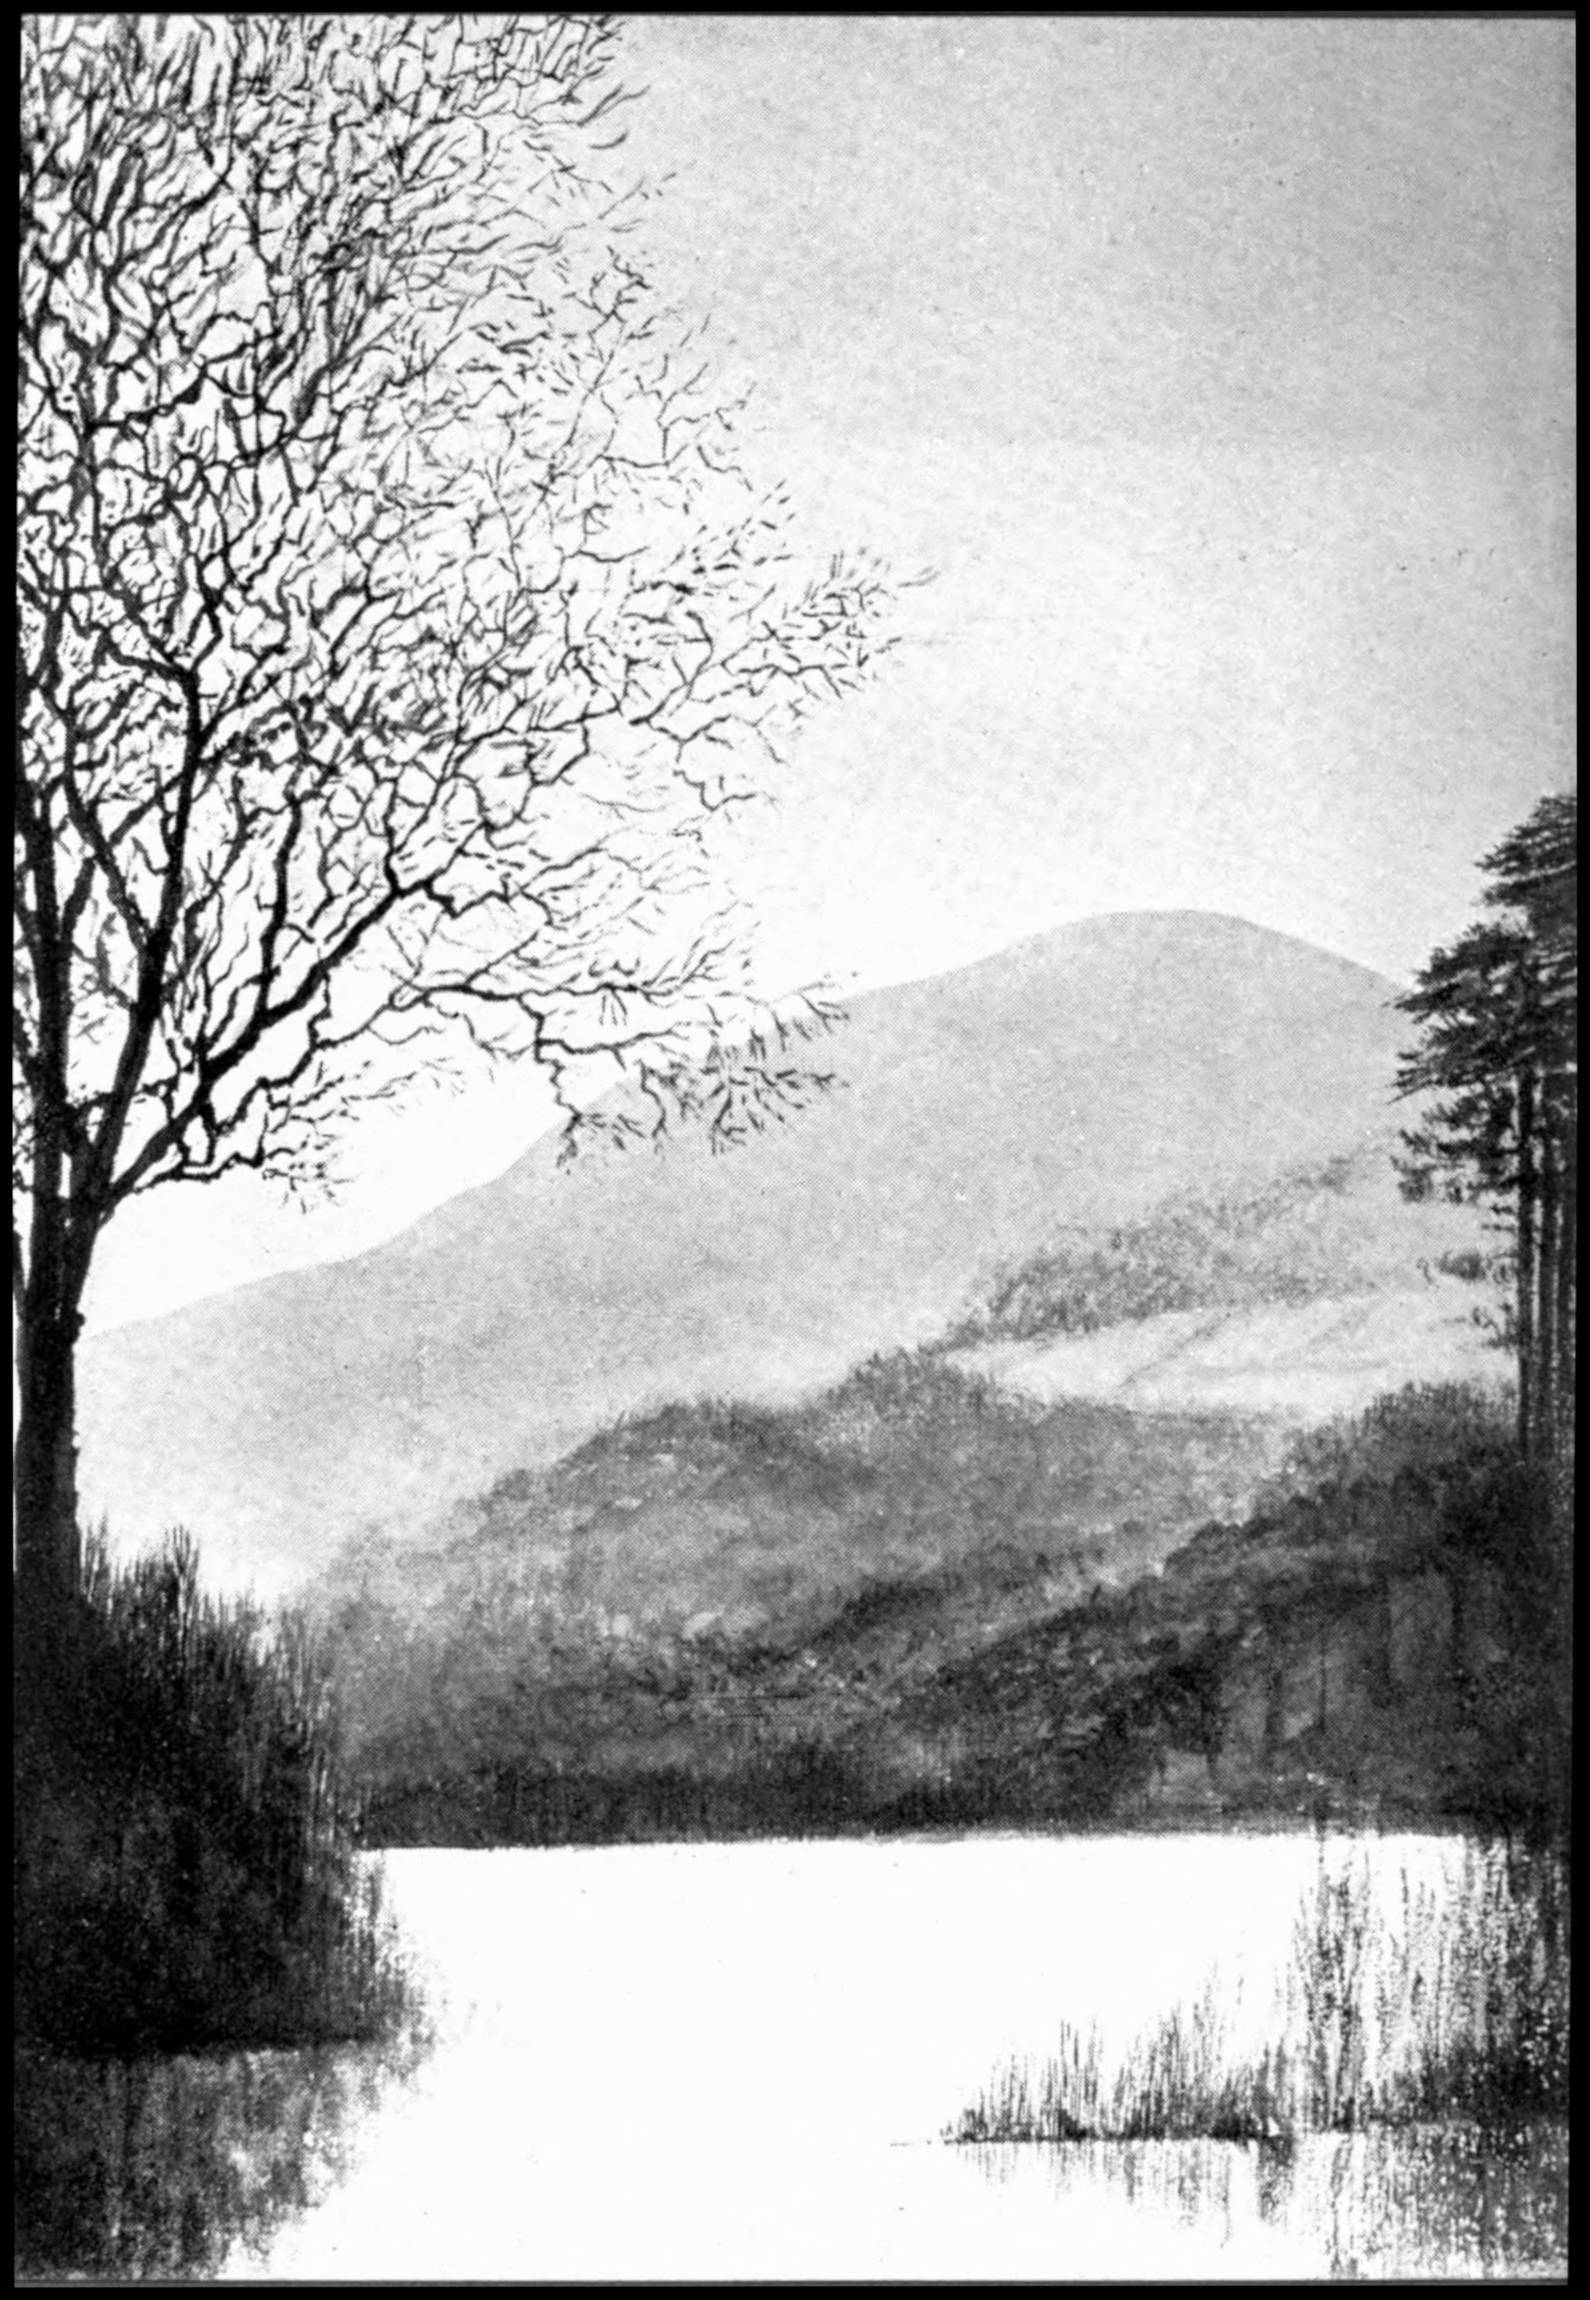 Grayscale sketch of a lake stretching into distant hills. A single tree stands in the foreground to the left, and several trees in the distance to the far right at the edge of the lake.